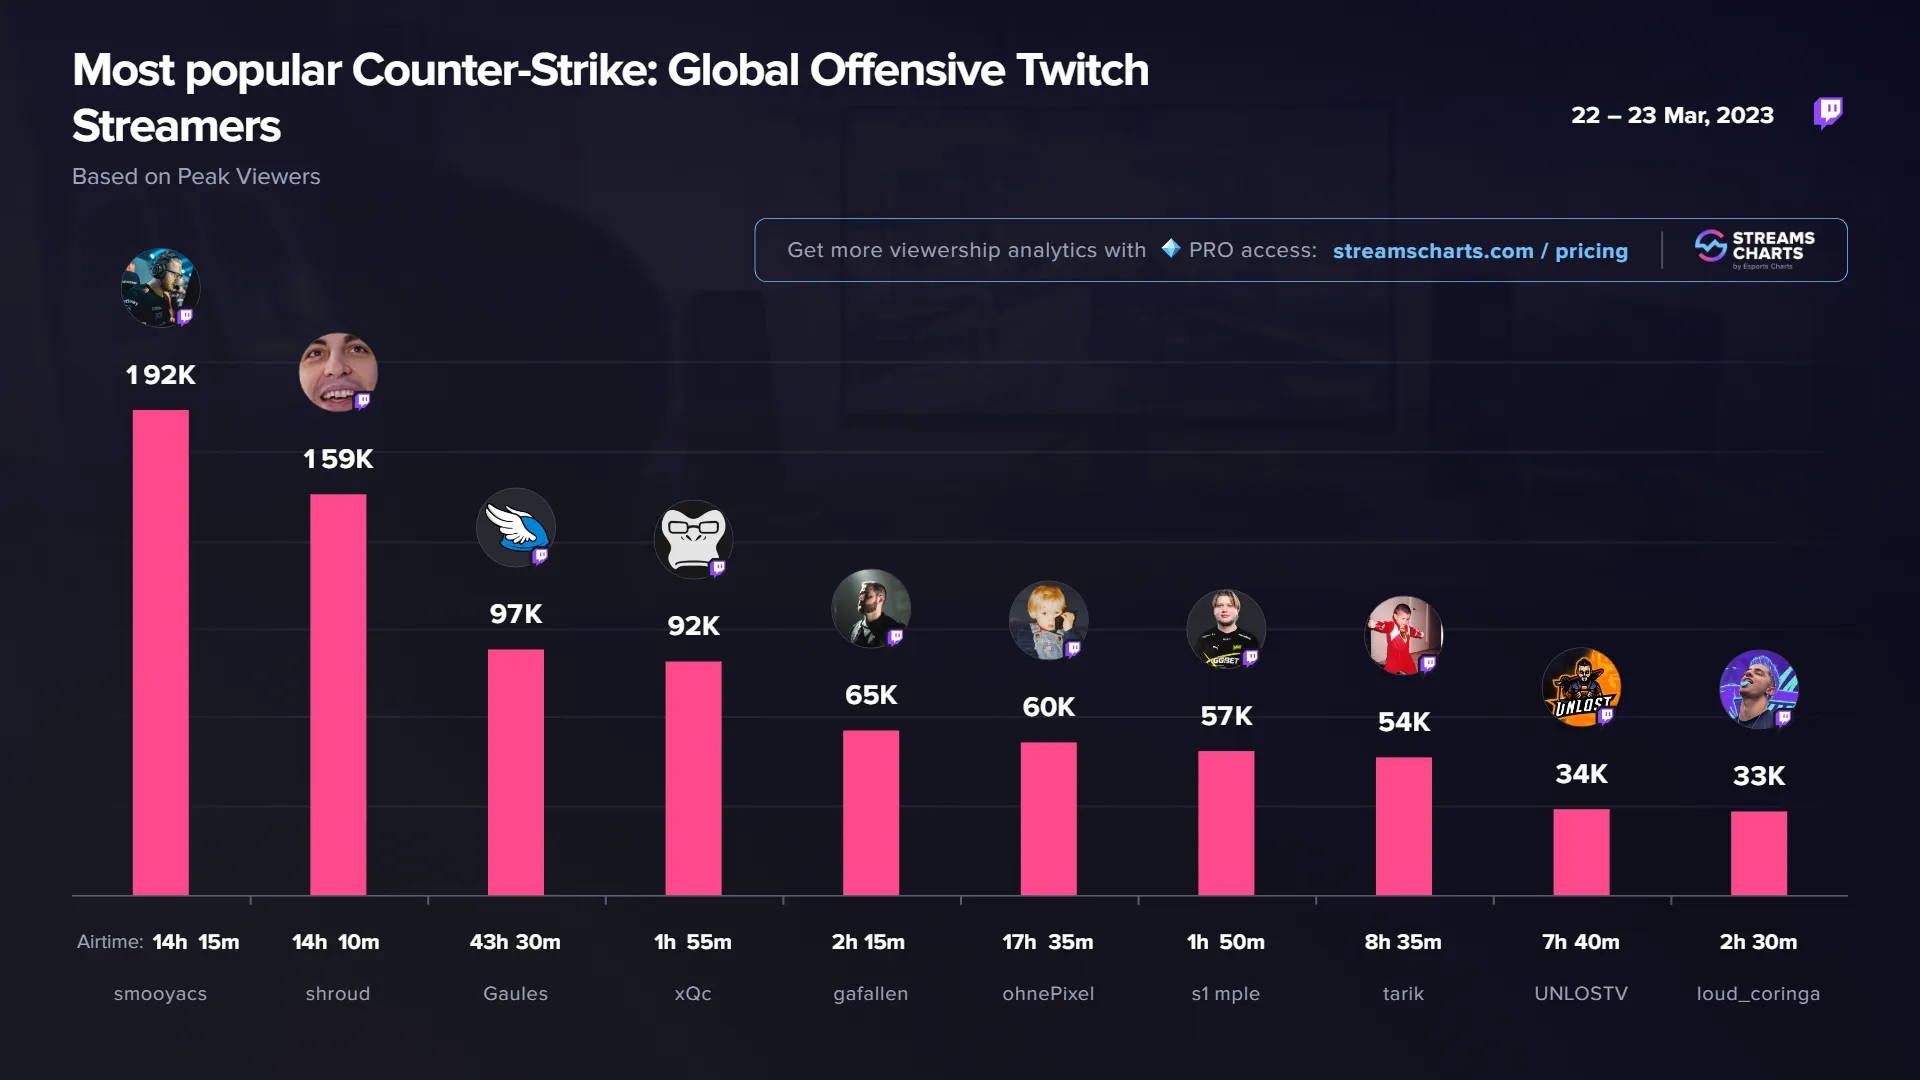 The most popular CS2 streamers on Twitch